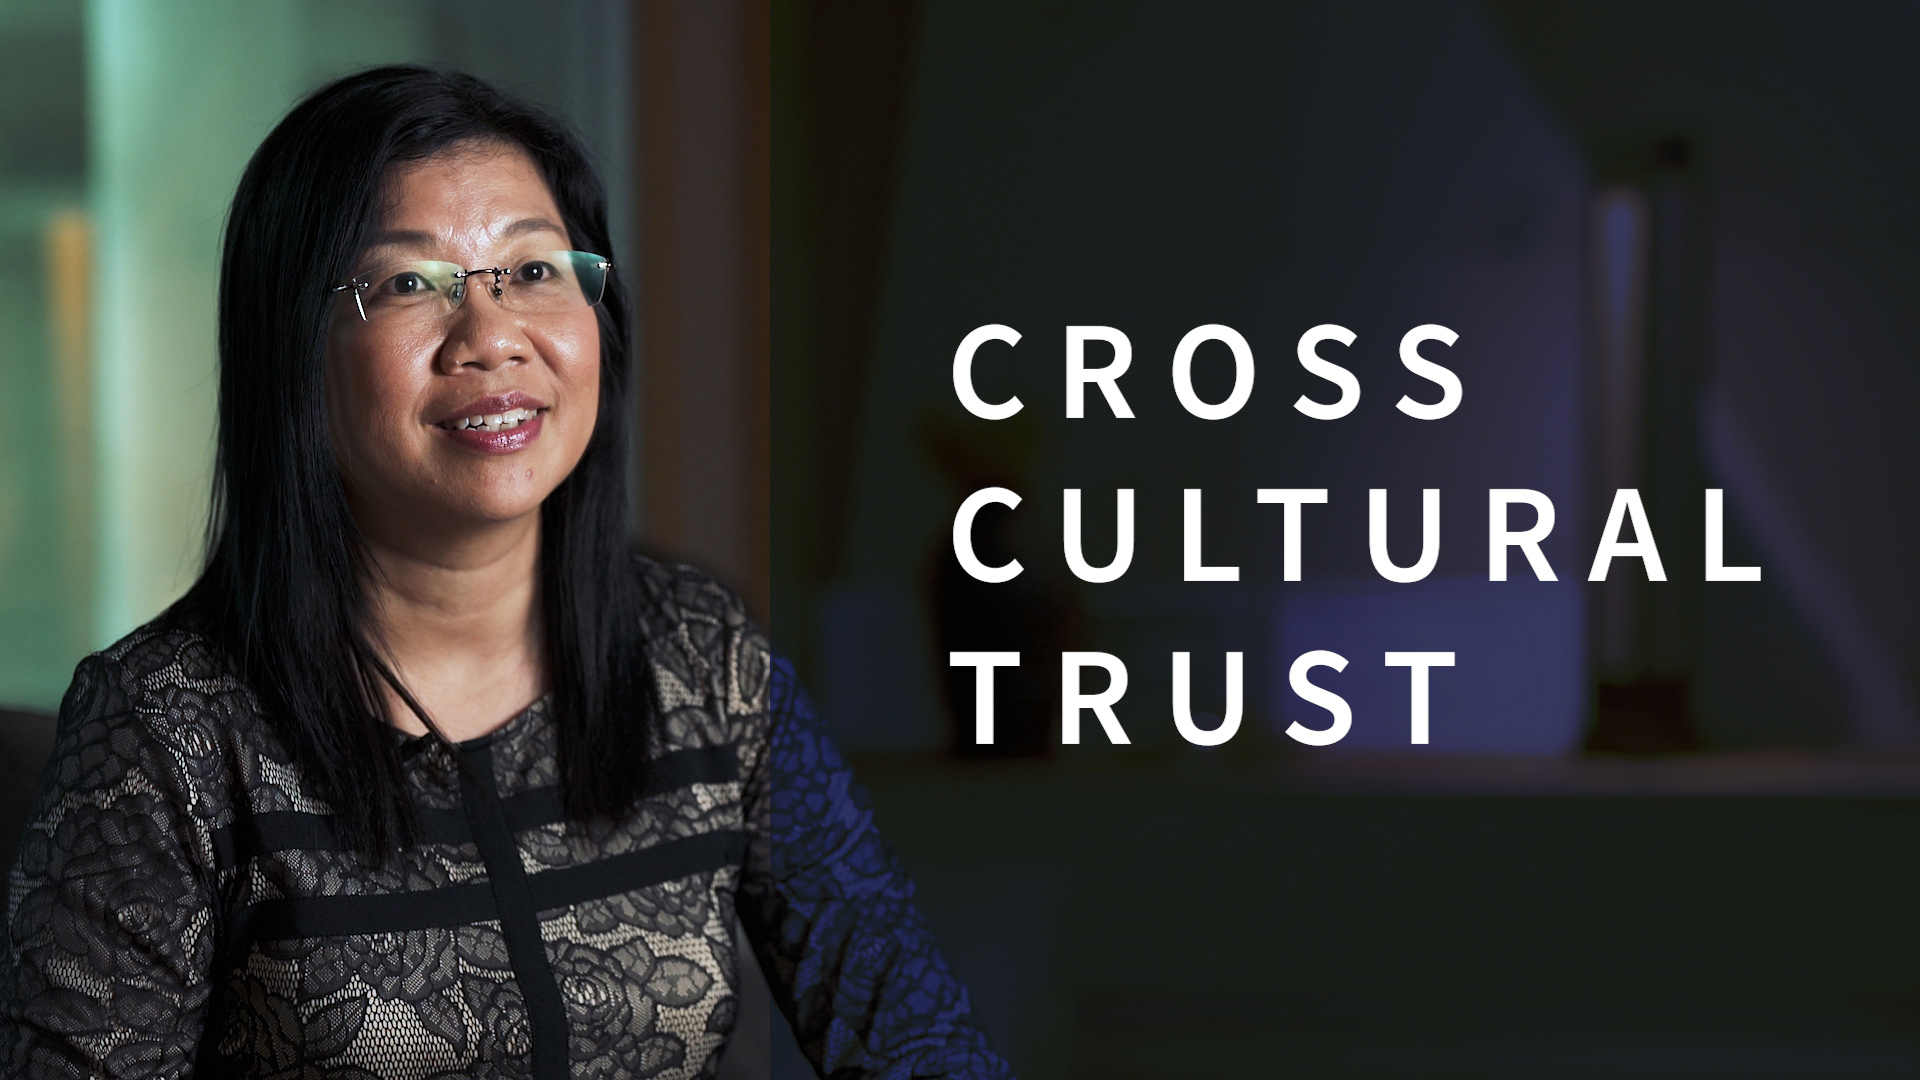 Image of Prof Tan Hwee Hoon, with video title: Cross Cultural Trust